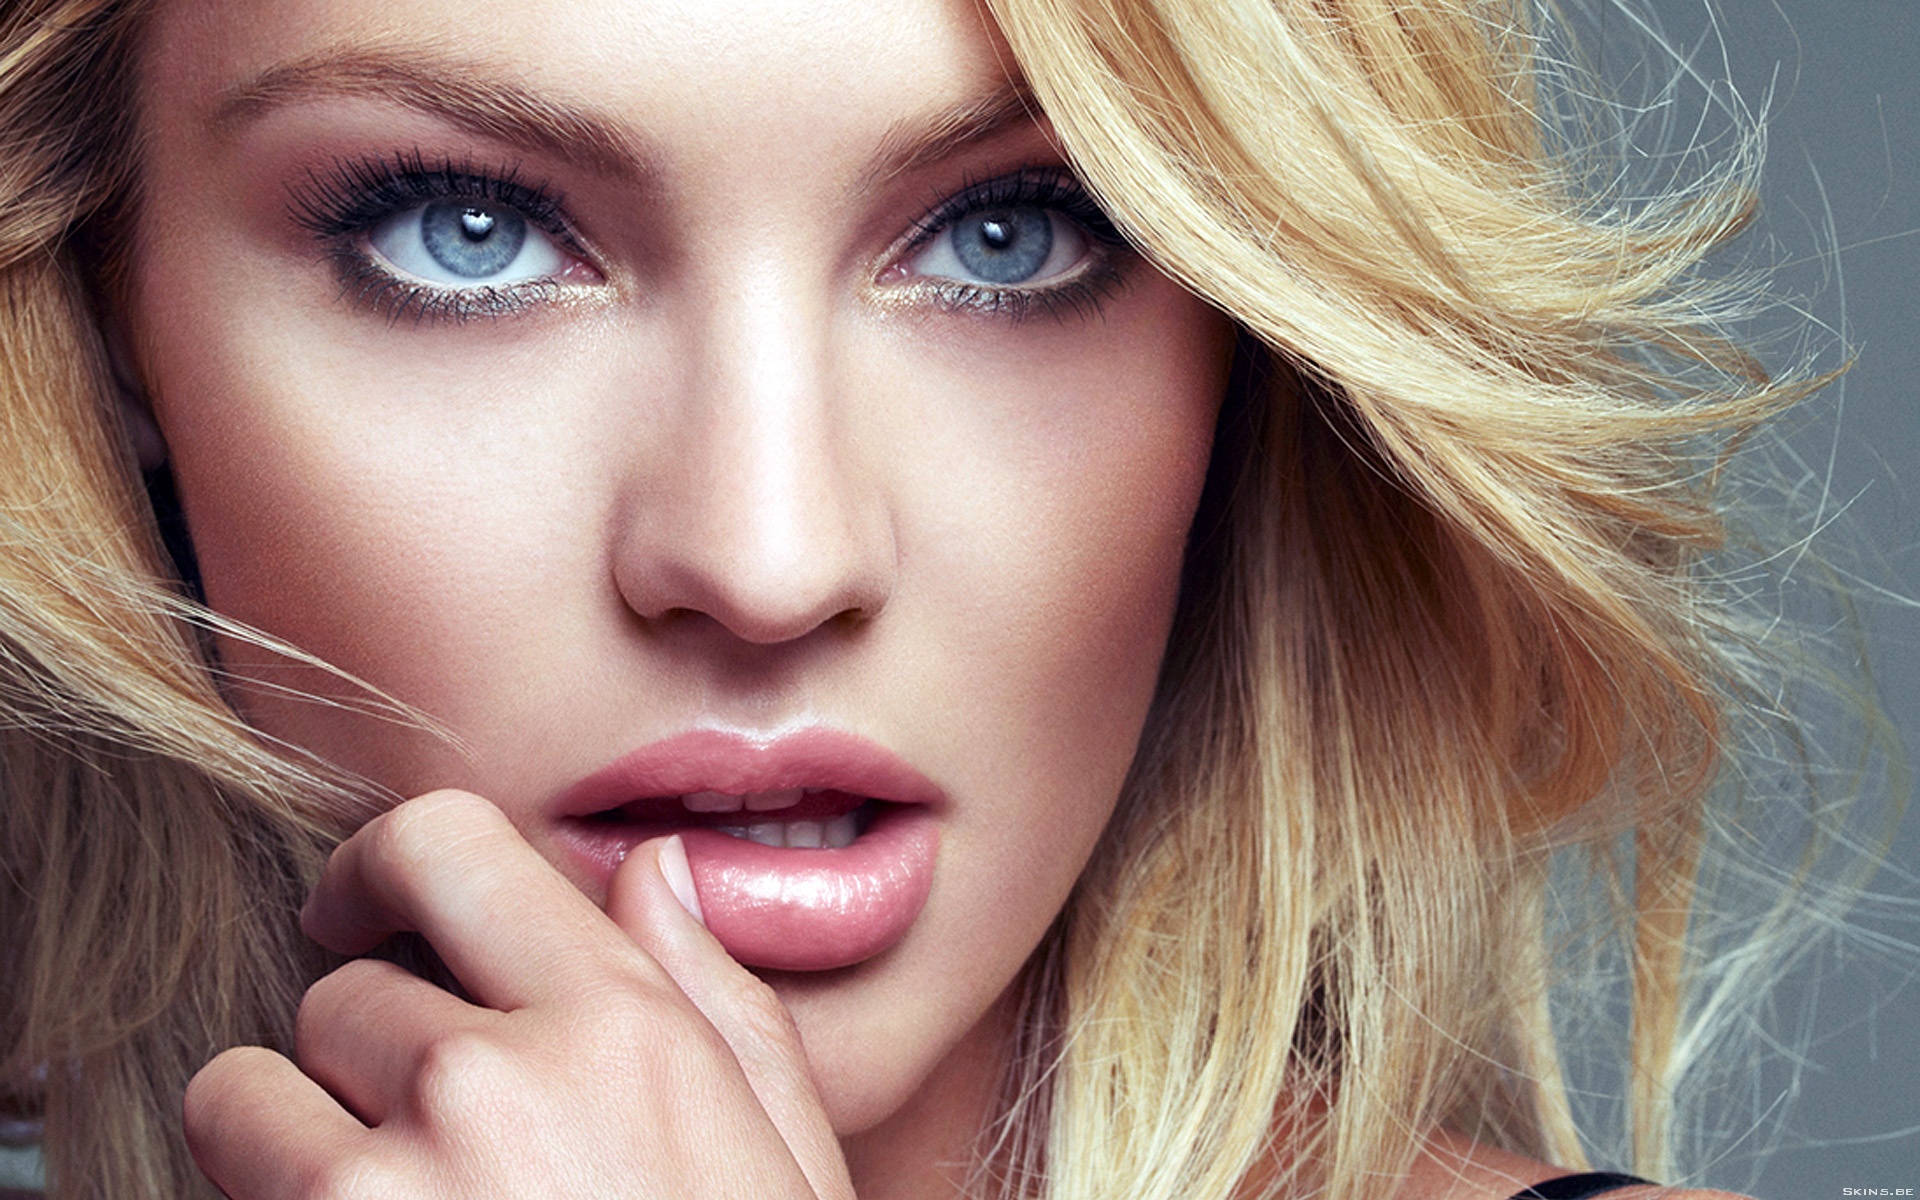 Candice Swanepoel 1920x1200 28 - 10 Sexiest Countries With The Hottest Bombshells!